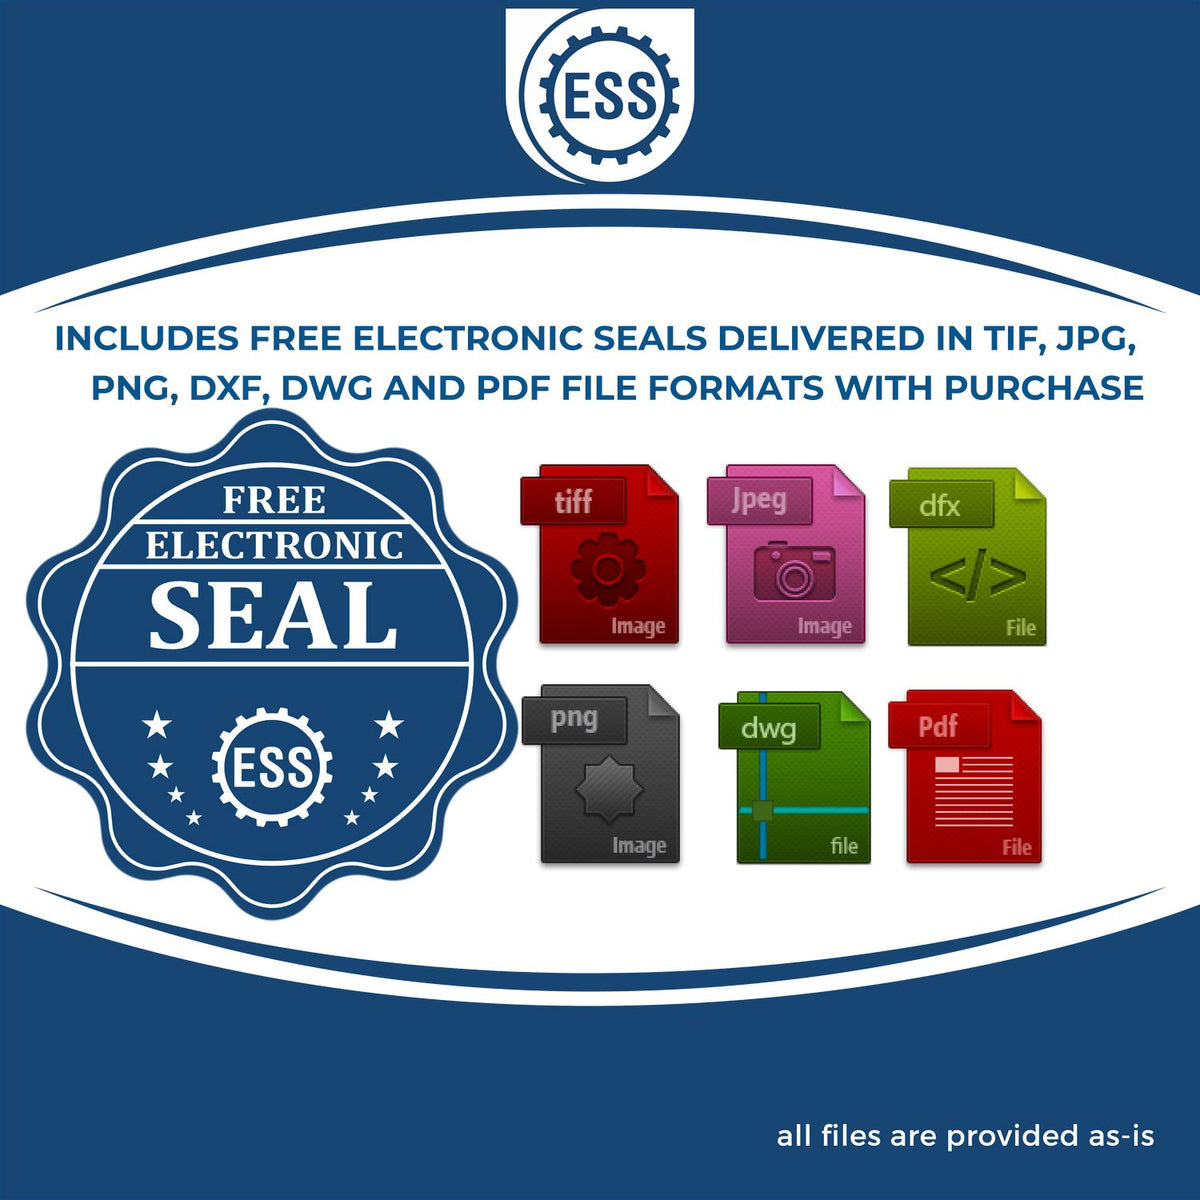 An infographic for the free electronic seal for the Illinois Professional Geologist Seal Stamp illustrating the different file type icons such as DXF, DWG, TIF, JPG and PNG.